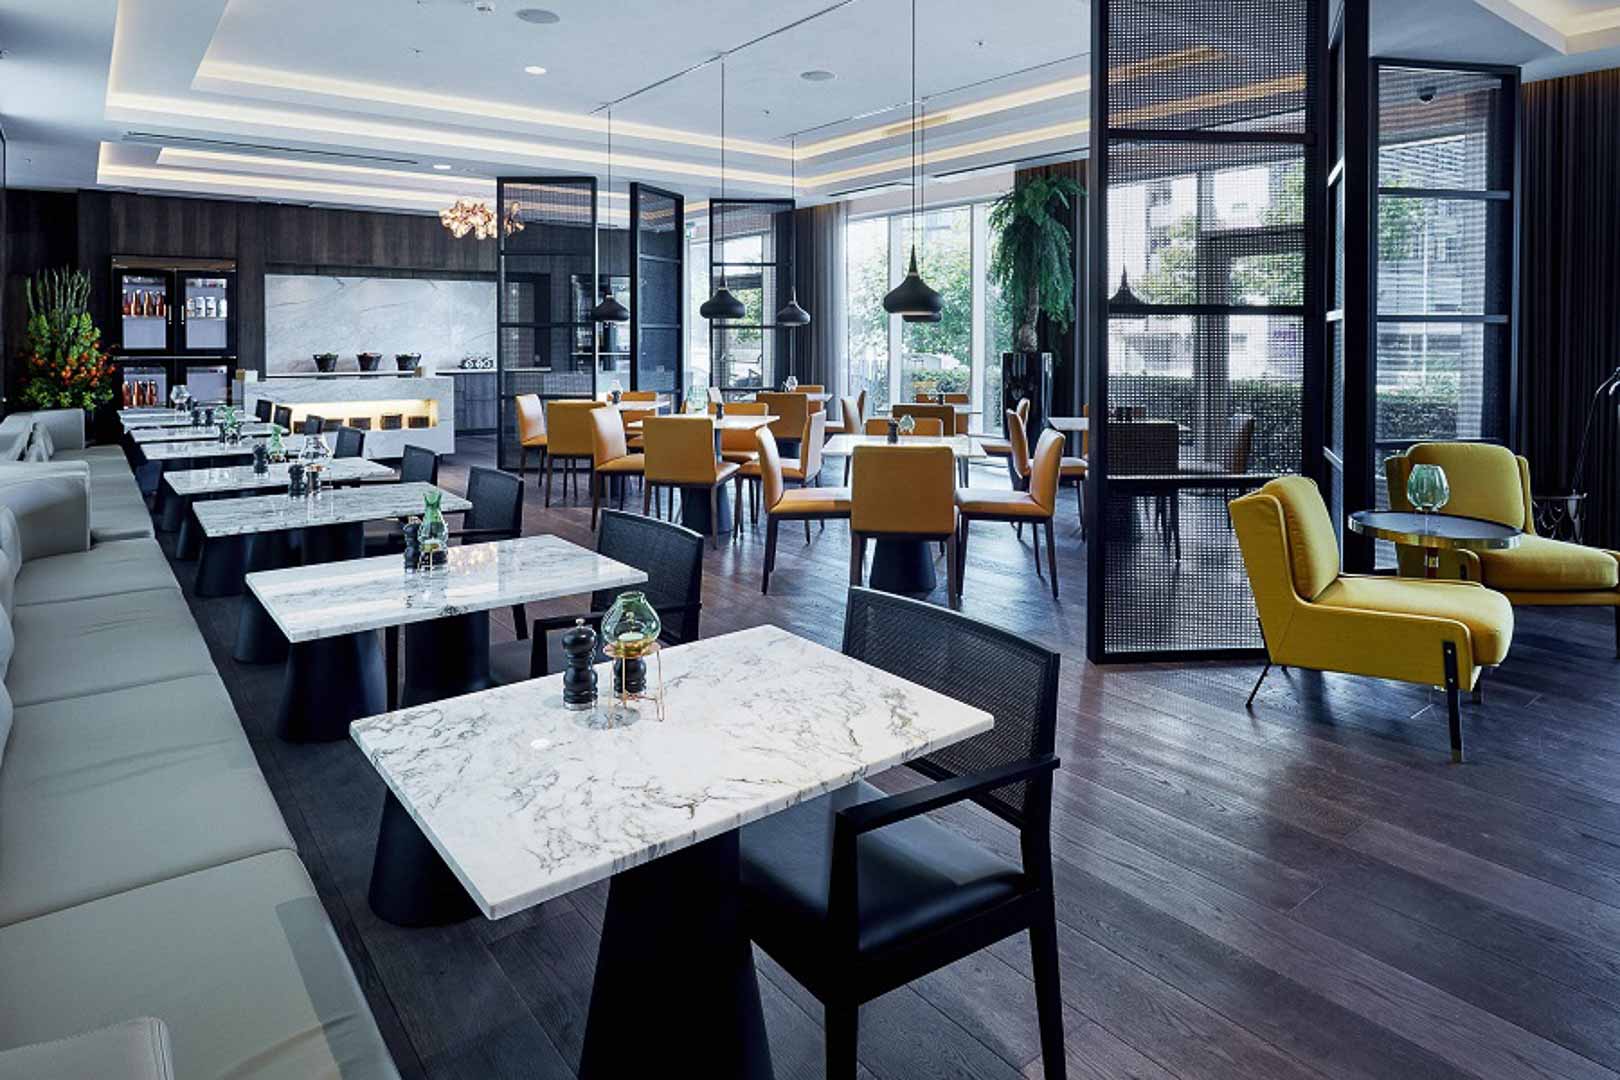 Calm restaurant with large windows, Marriott Hotel fitout and furniture, Brussels, Belgium